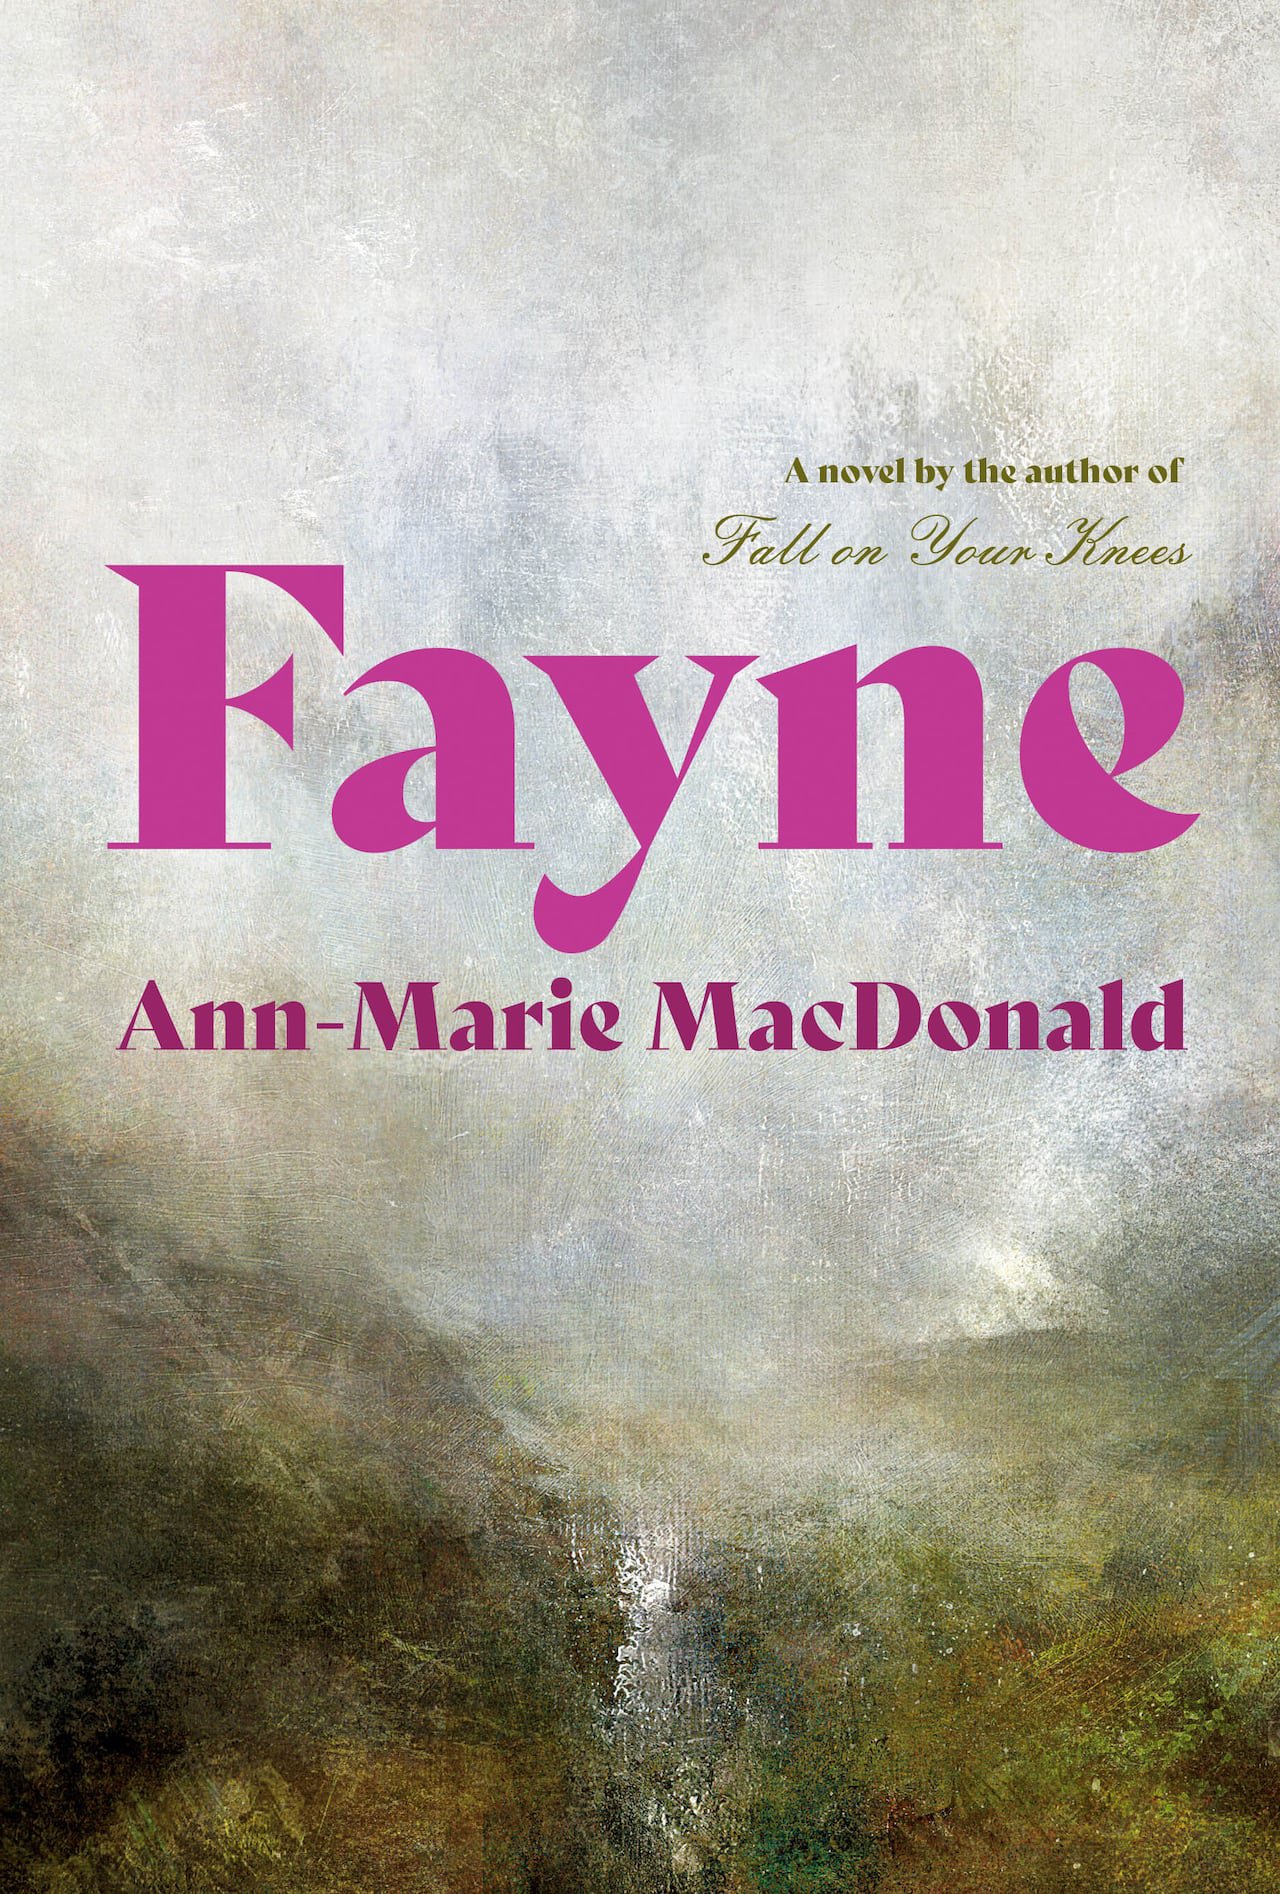 Fayne by Ann-Marie Macdonald book cover